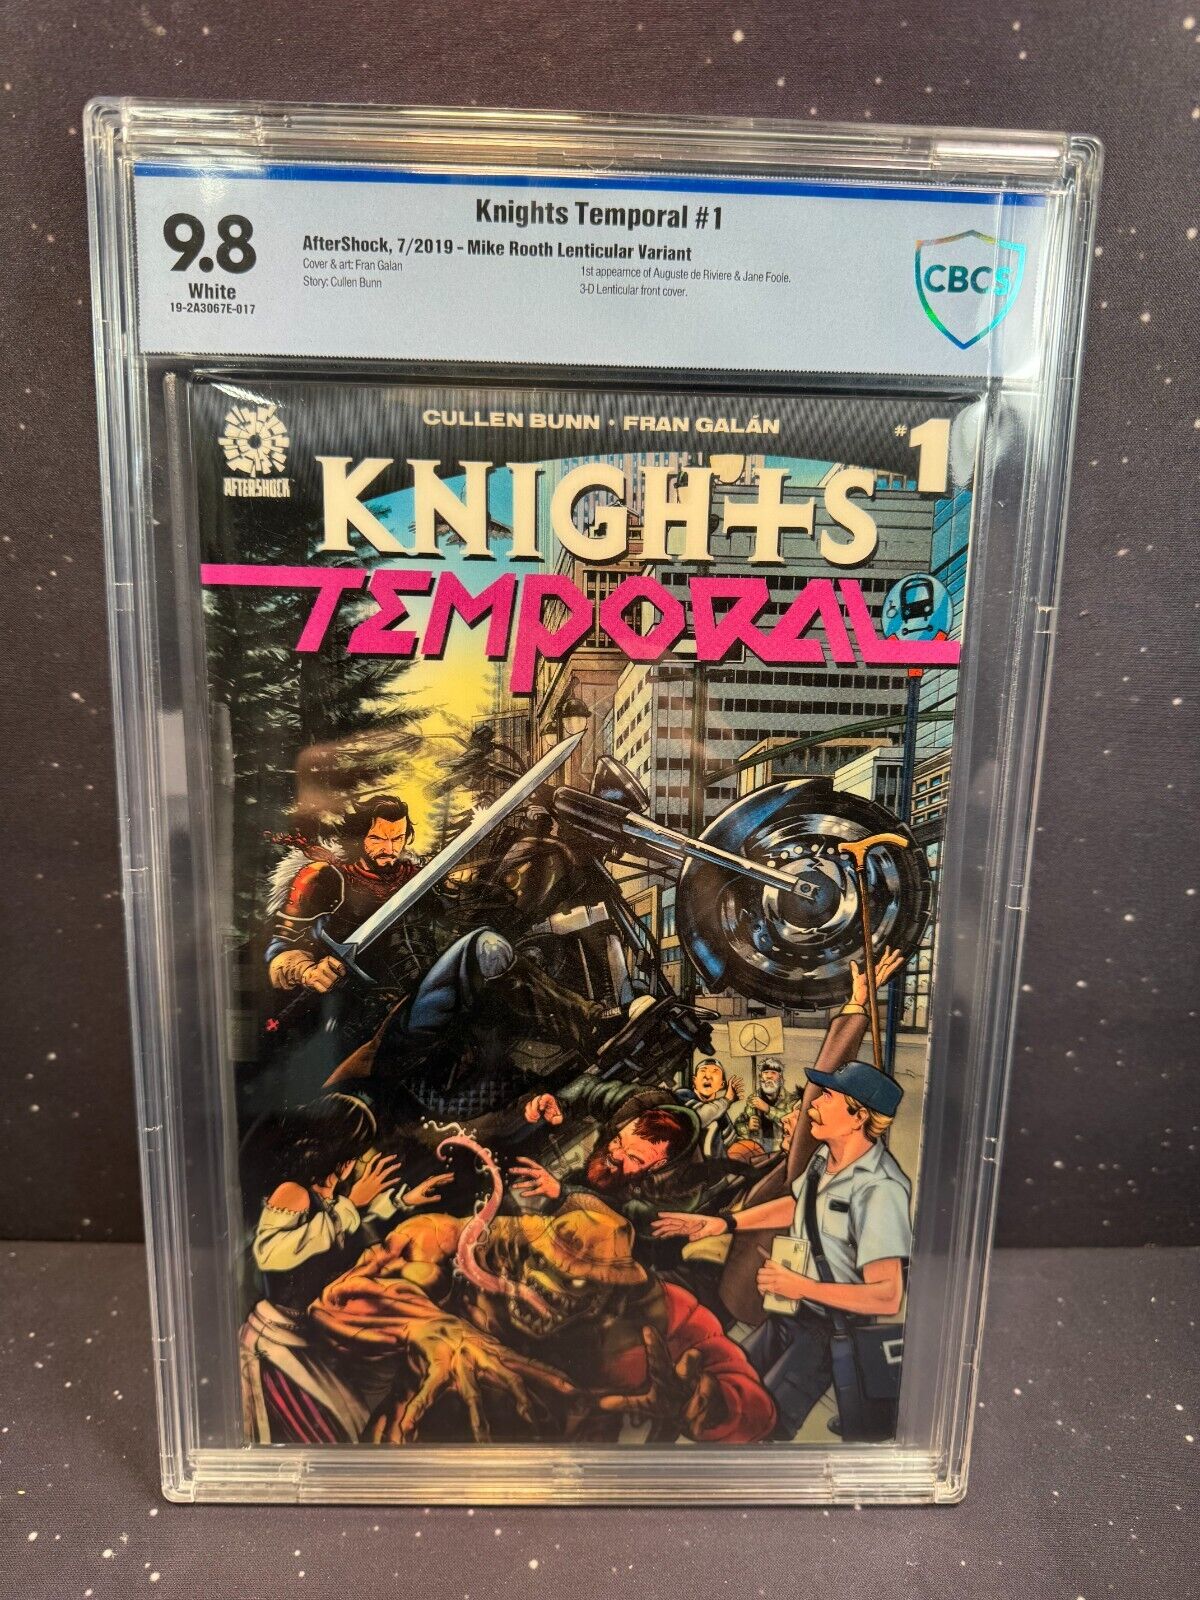 2019 Aftershock Knights Temporal #1 CBCS 9.8 White - Variant Lenticular Cover